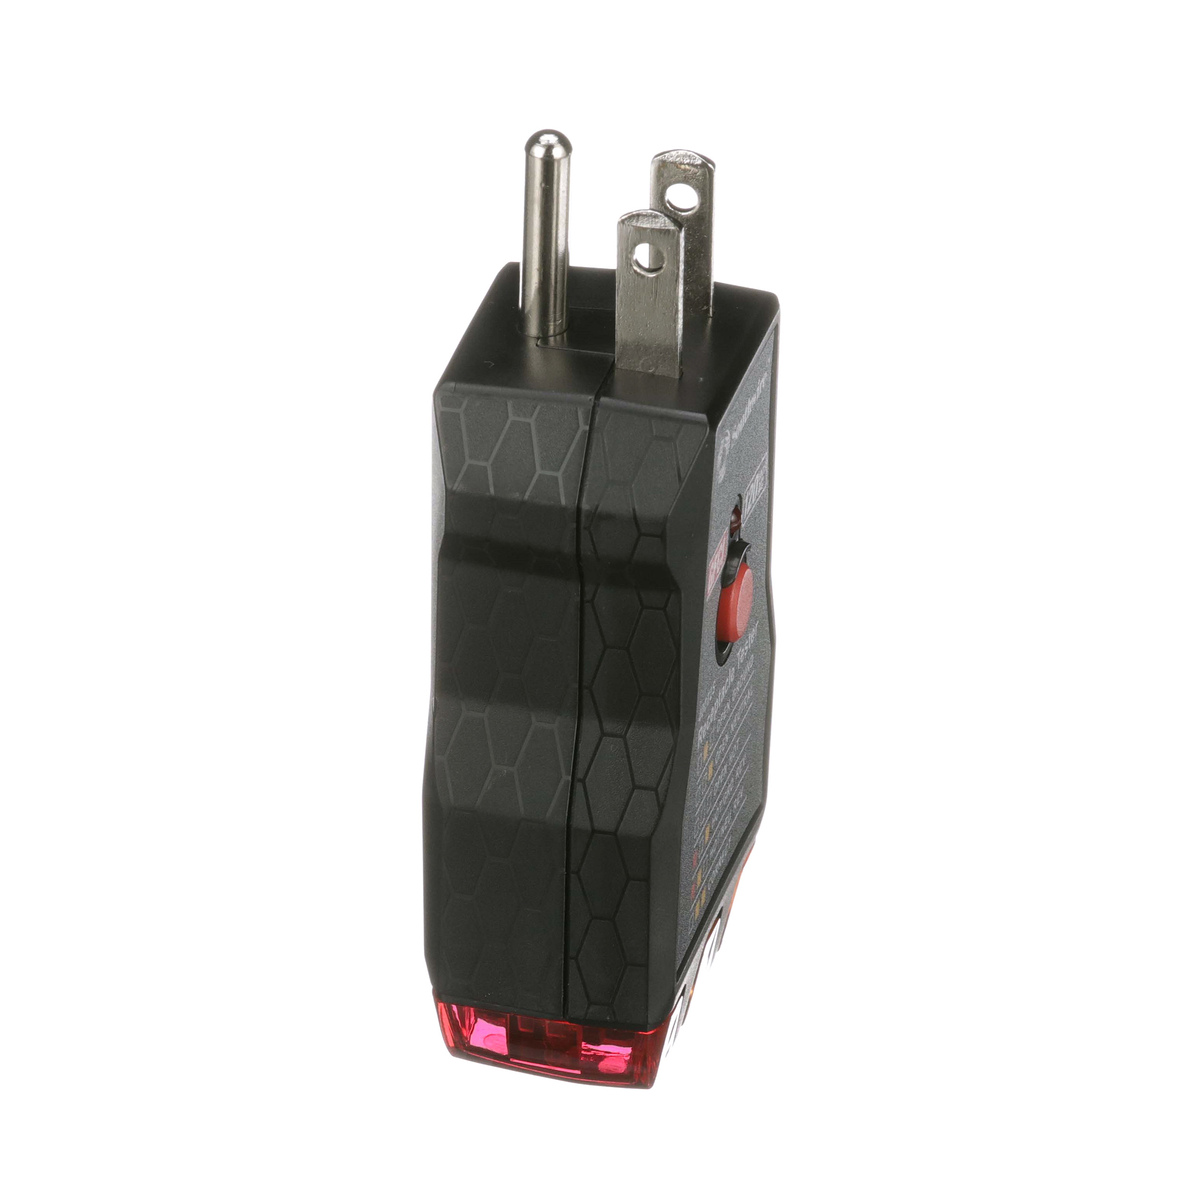 120V AC Receptacle Tester with Push-Button GFCI Test